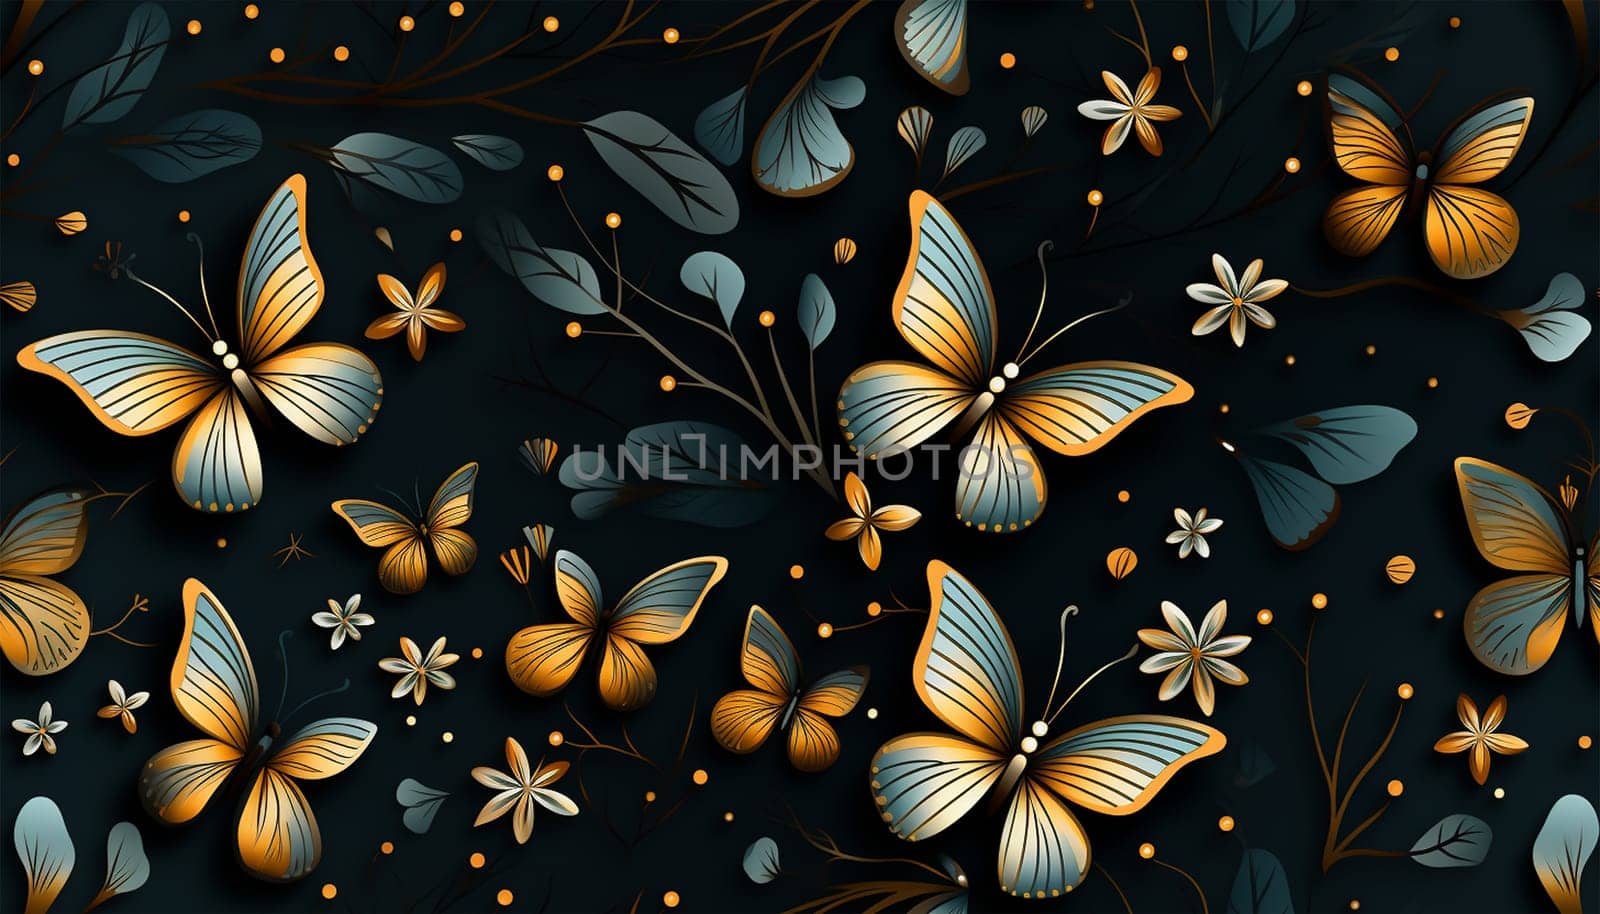 Cute wildflowers and night butterflies seamless pattern. Flowers and insects. art illustration. Navy blue background and gold foil printing. Dark floral pattern for textiles, paper, wallpapers. by Annebel146